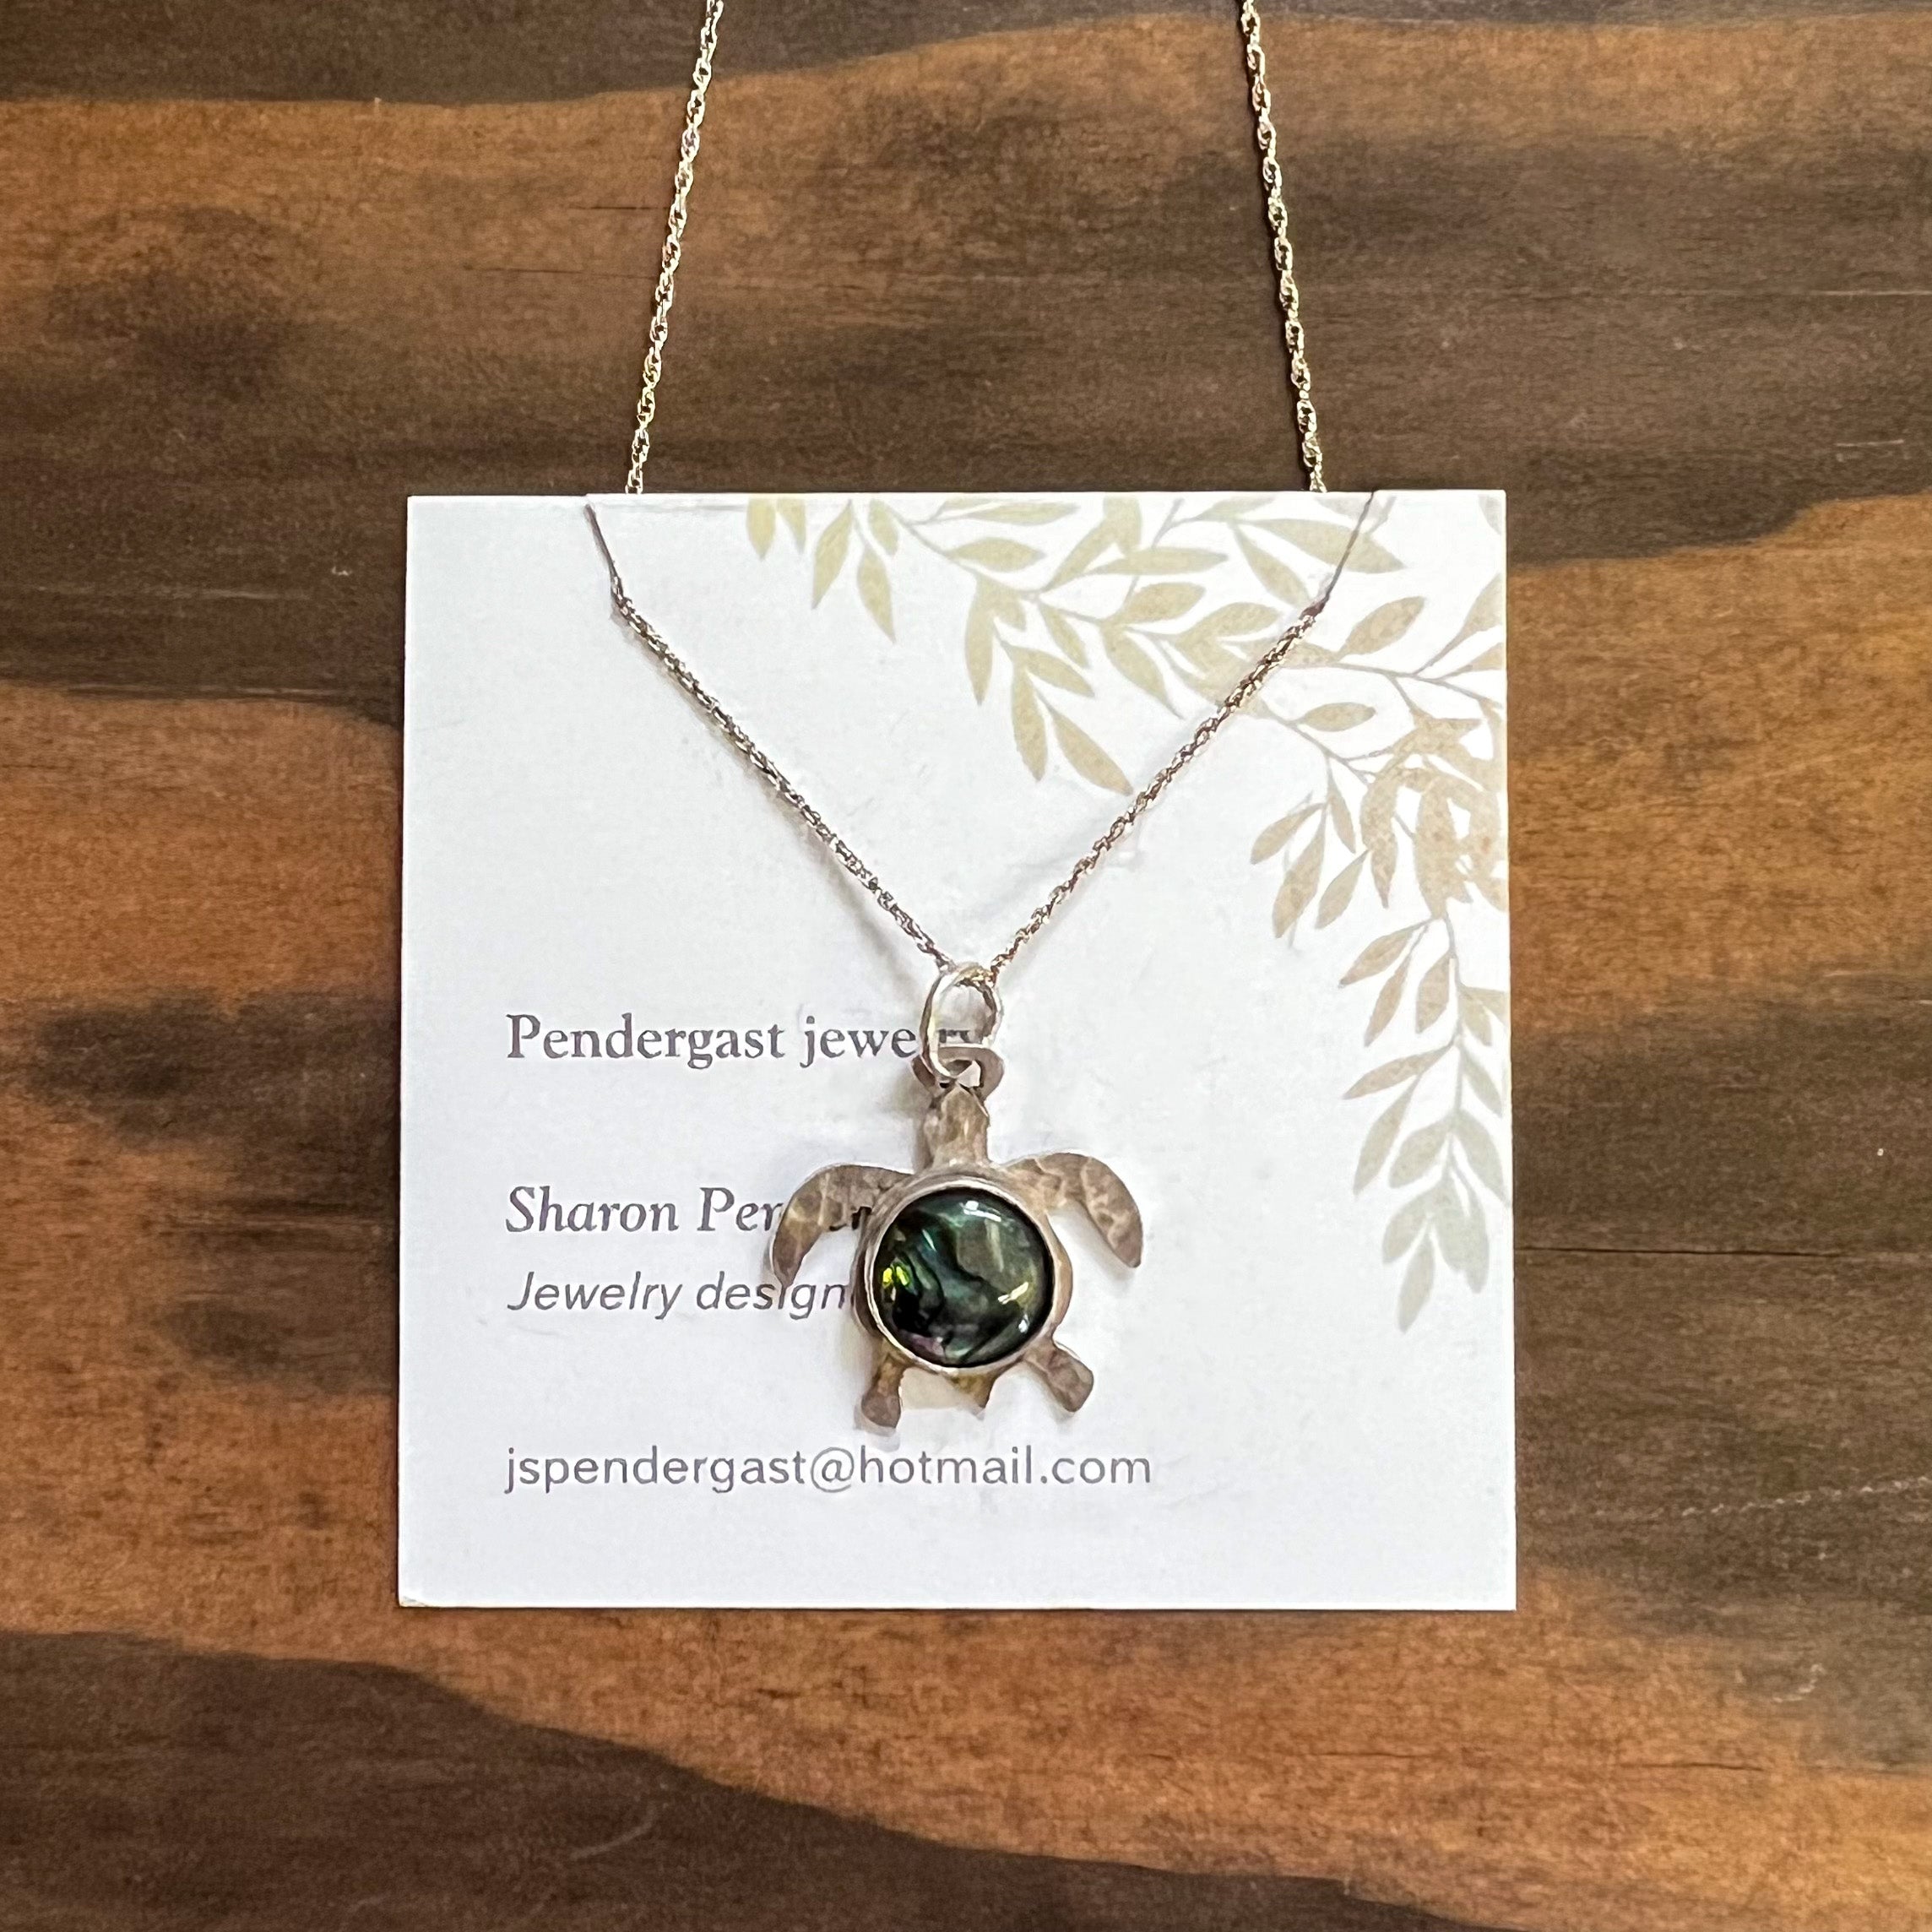 Pendergast Jewelry Sea Turtle Abalone Necklace